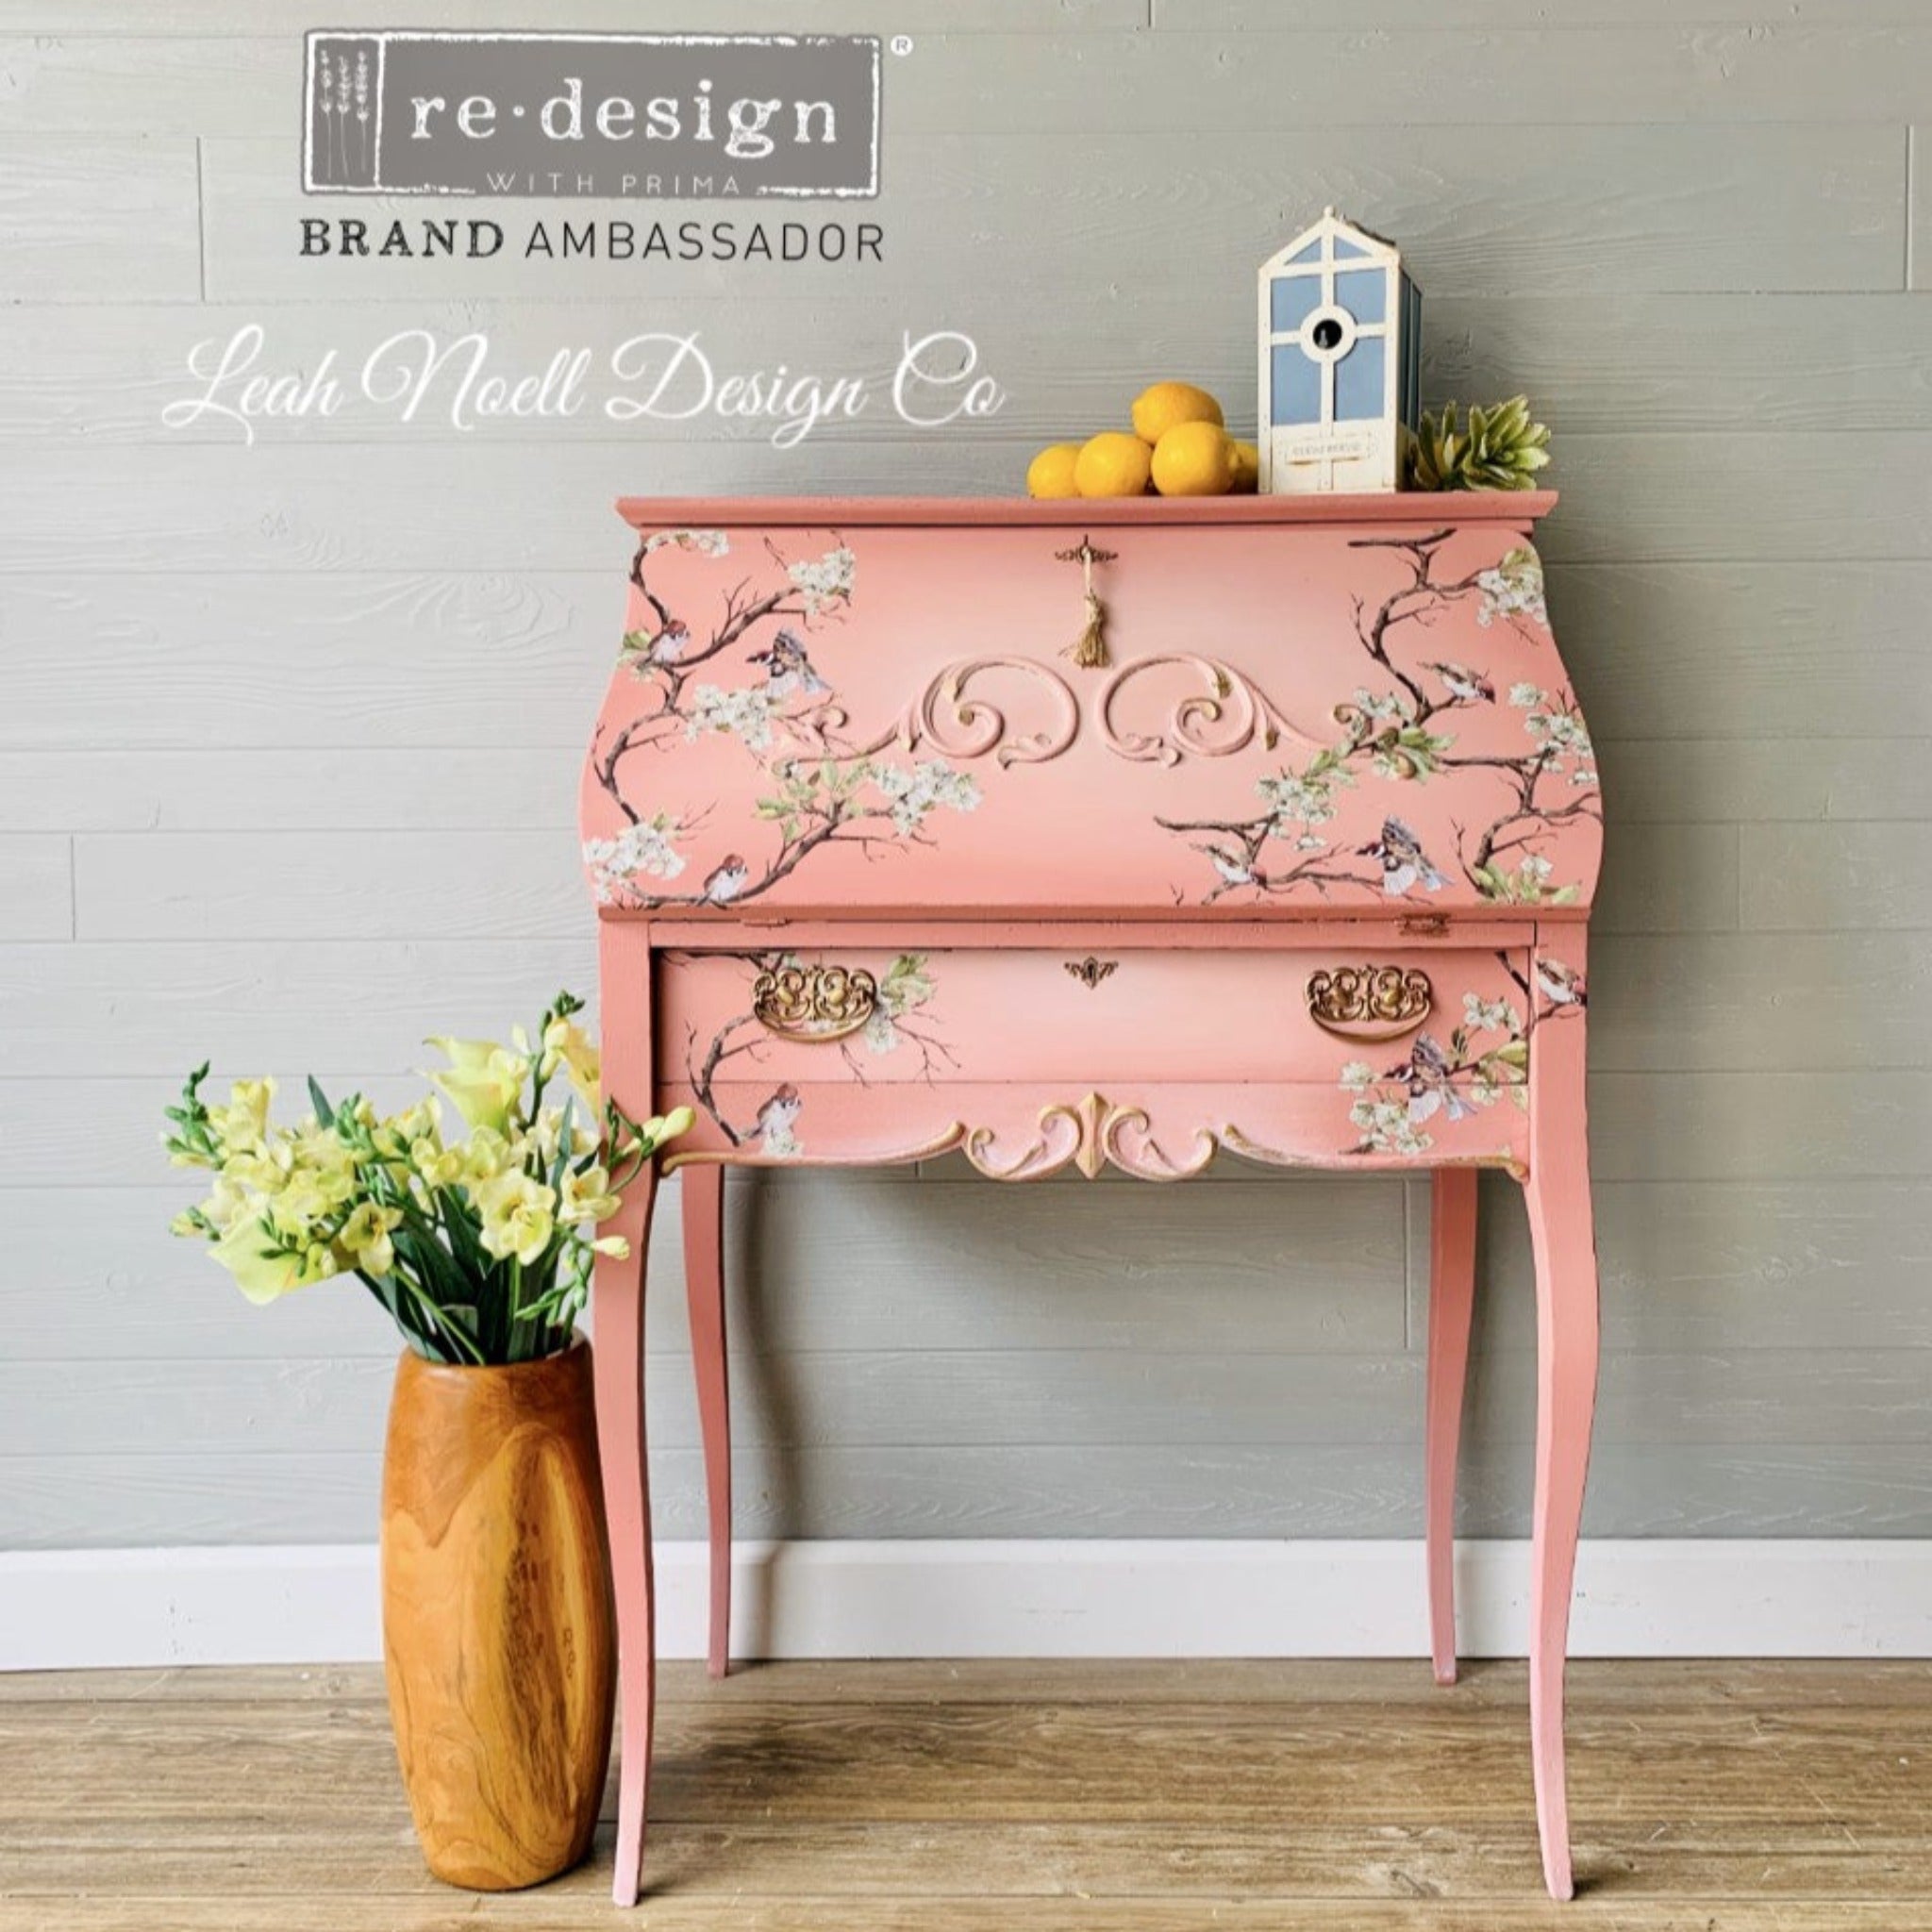 A vintage secretary's desk refurbished by Leah Noell Design Co. is painted light coral pink and features ReDesign with Prima's Blossom Flight transfer on it.